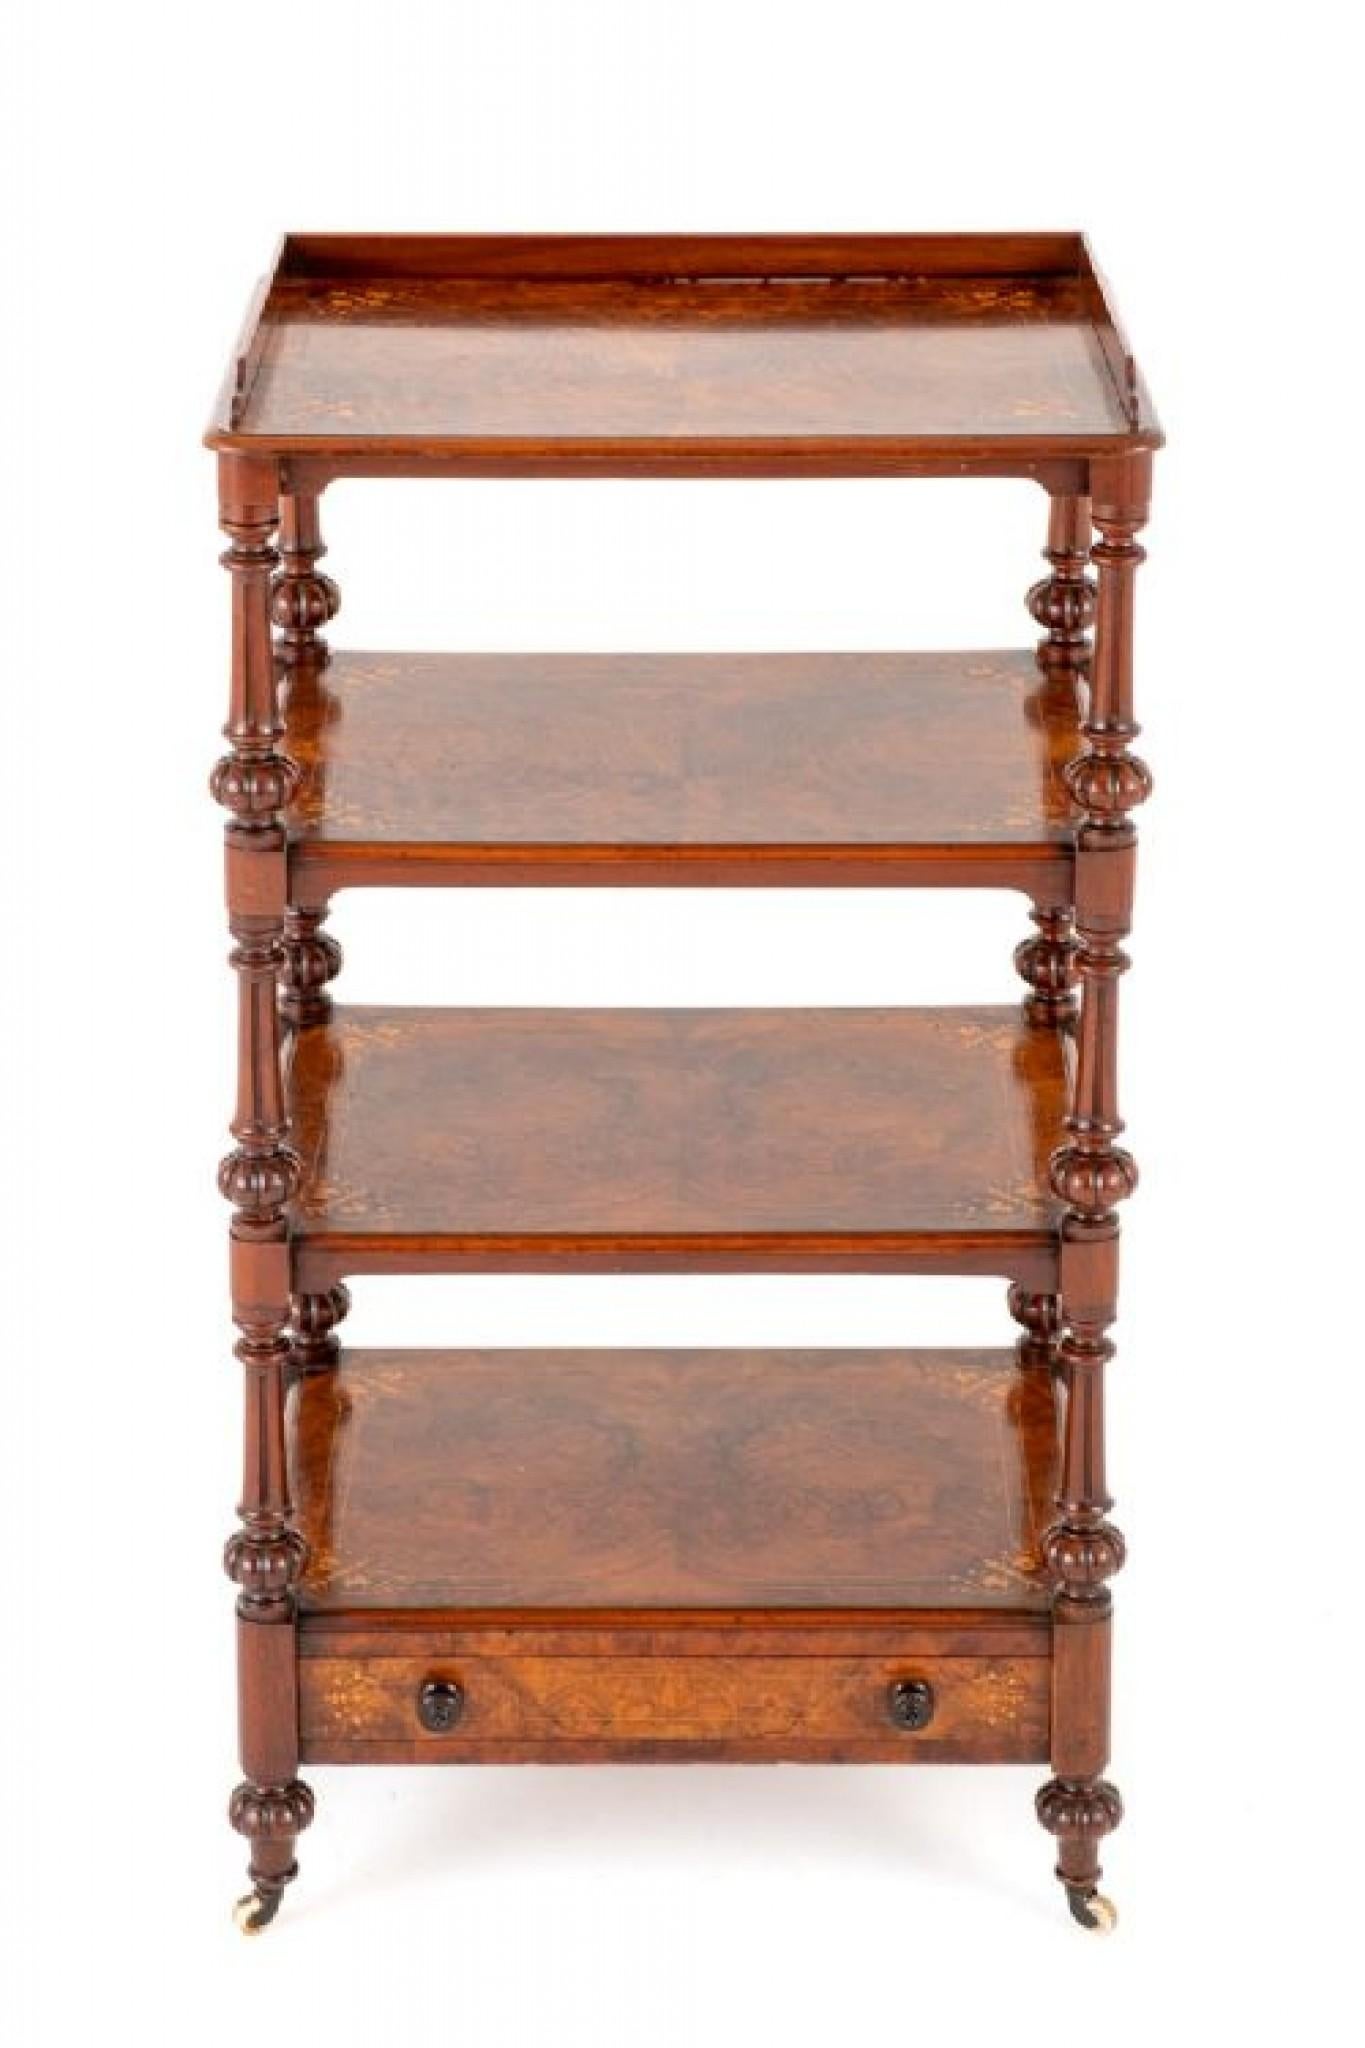 Victorian Whatnot Bookcase Walnut, 1860 For Sale 4